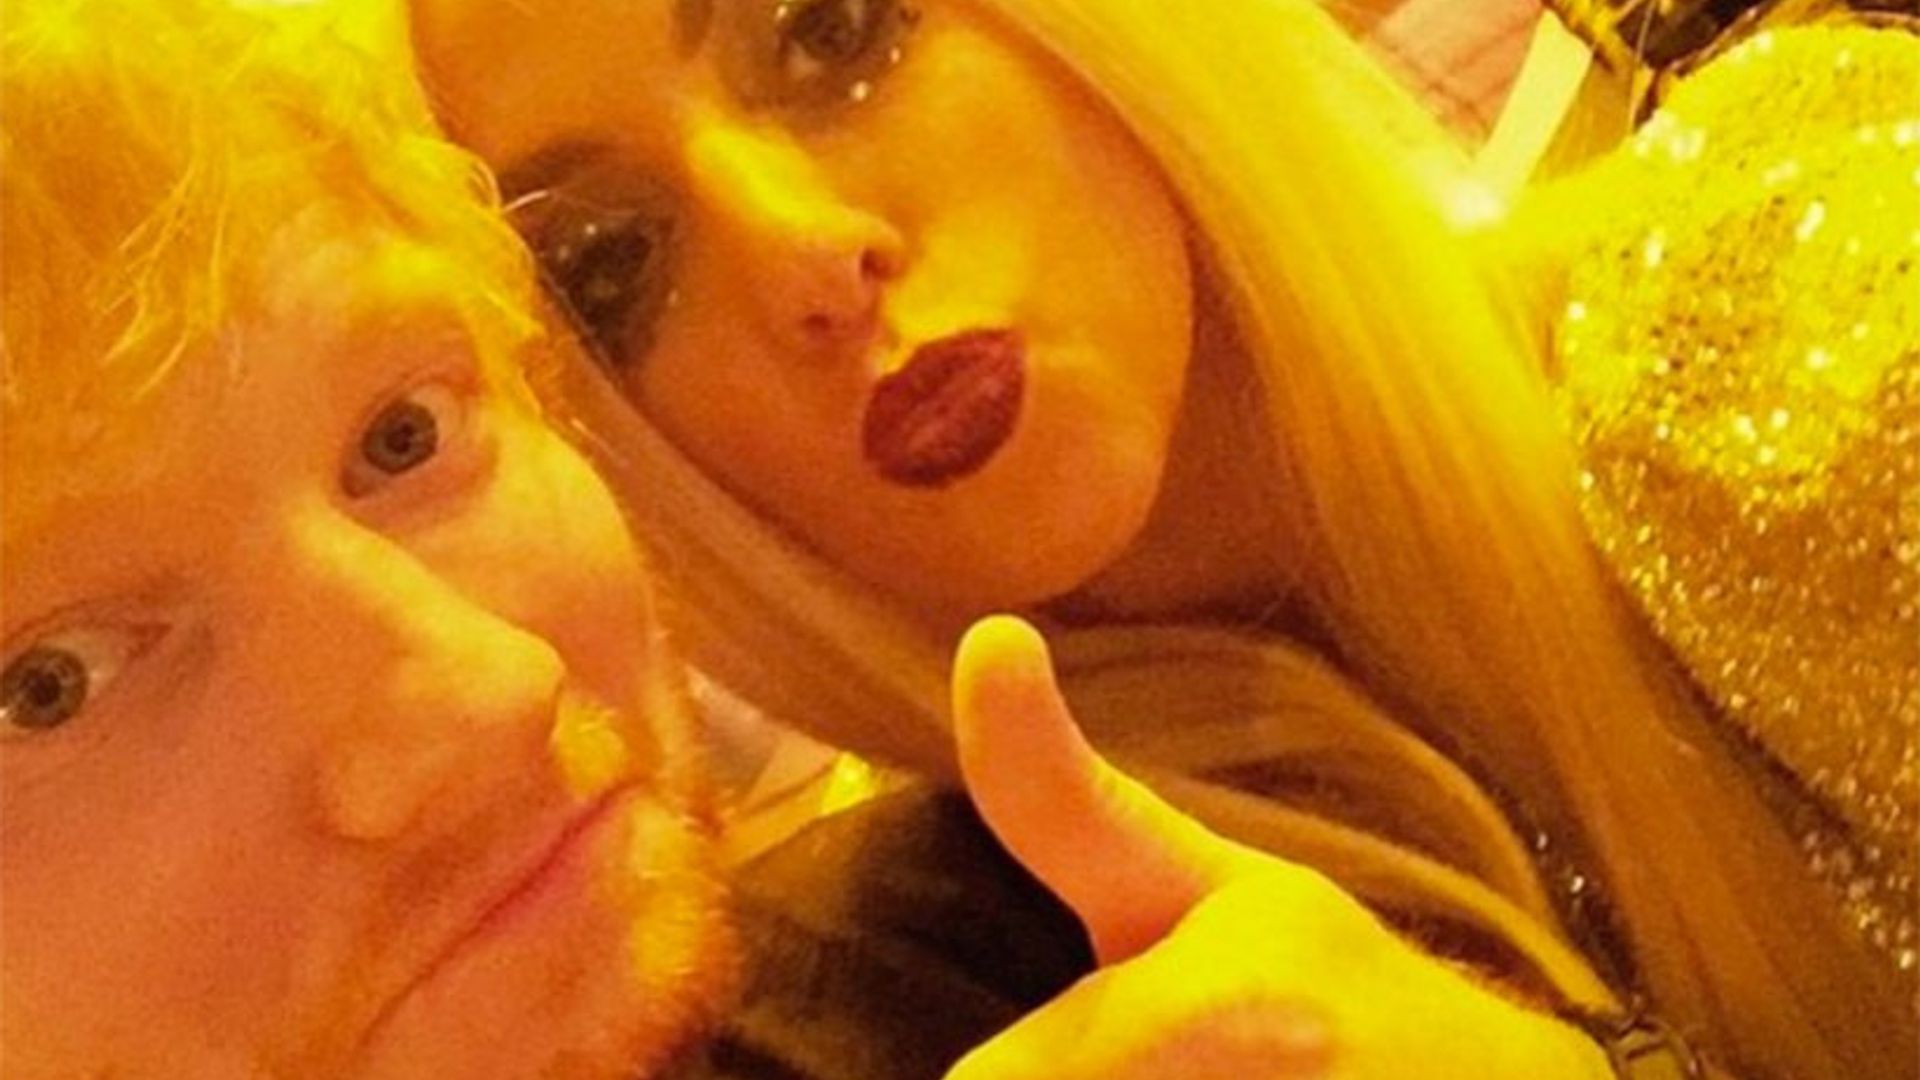 Lady Gaga comes to Ed Sheeran's defence after he quits Twitter